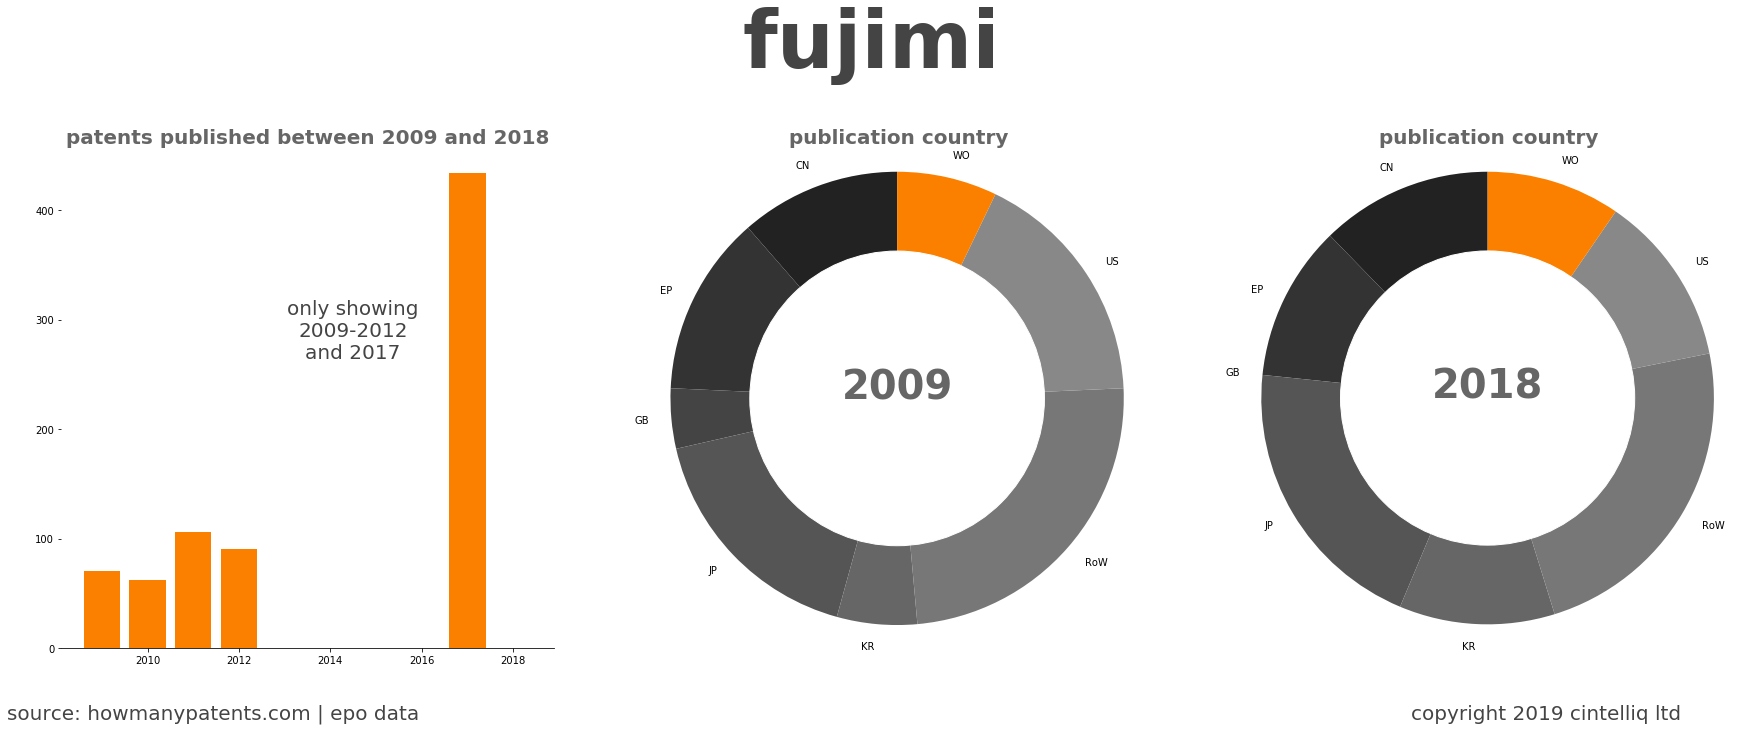 summary of patents for Fujimi